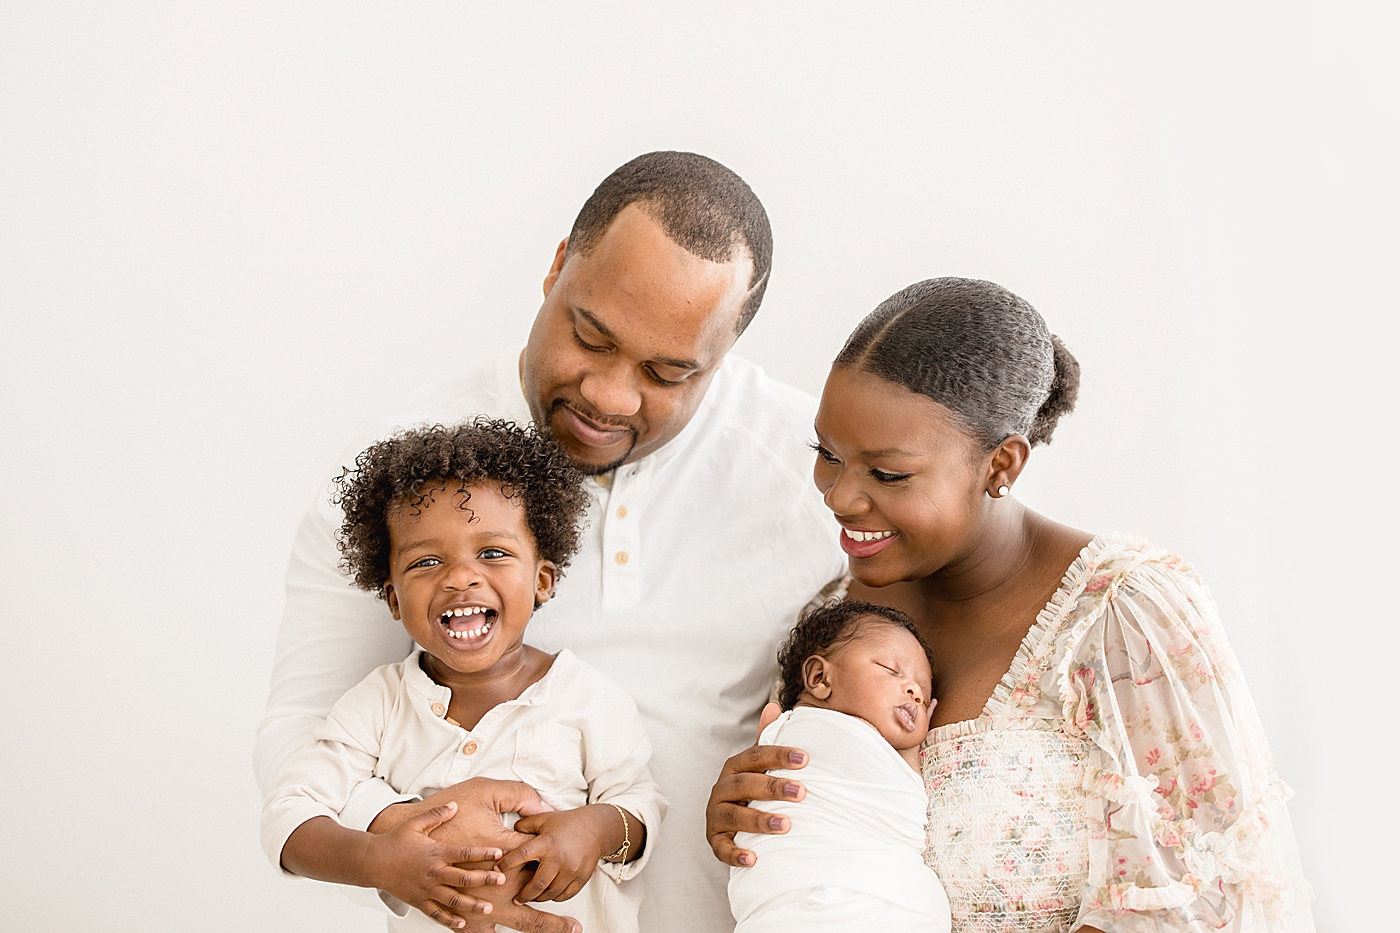 Family of four in studio in Tampa for newborn session. Photo by Brittany Elise Photography.